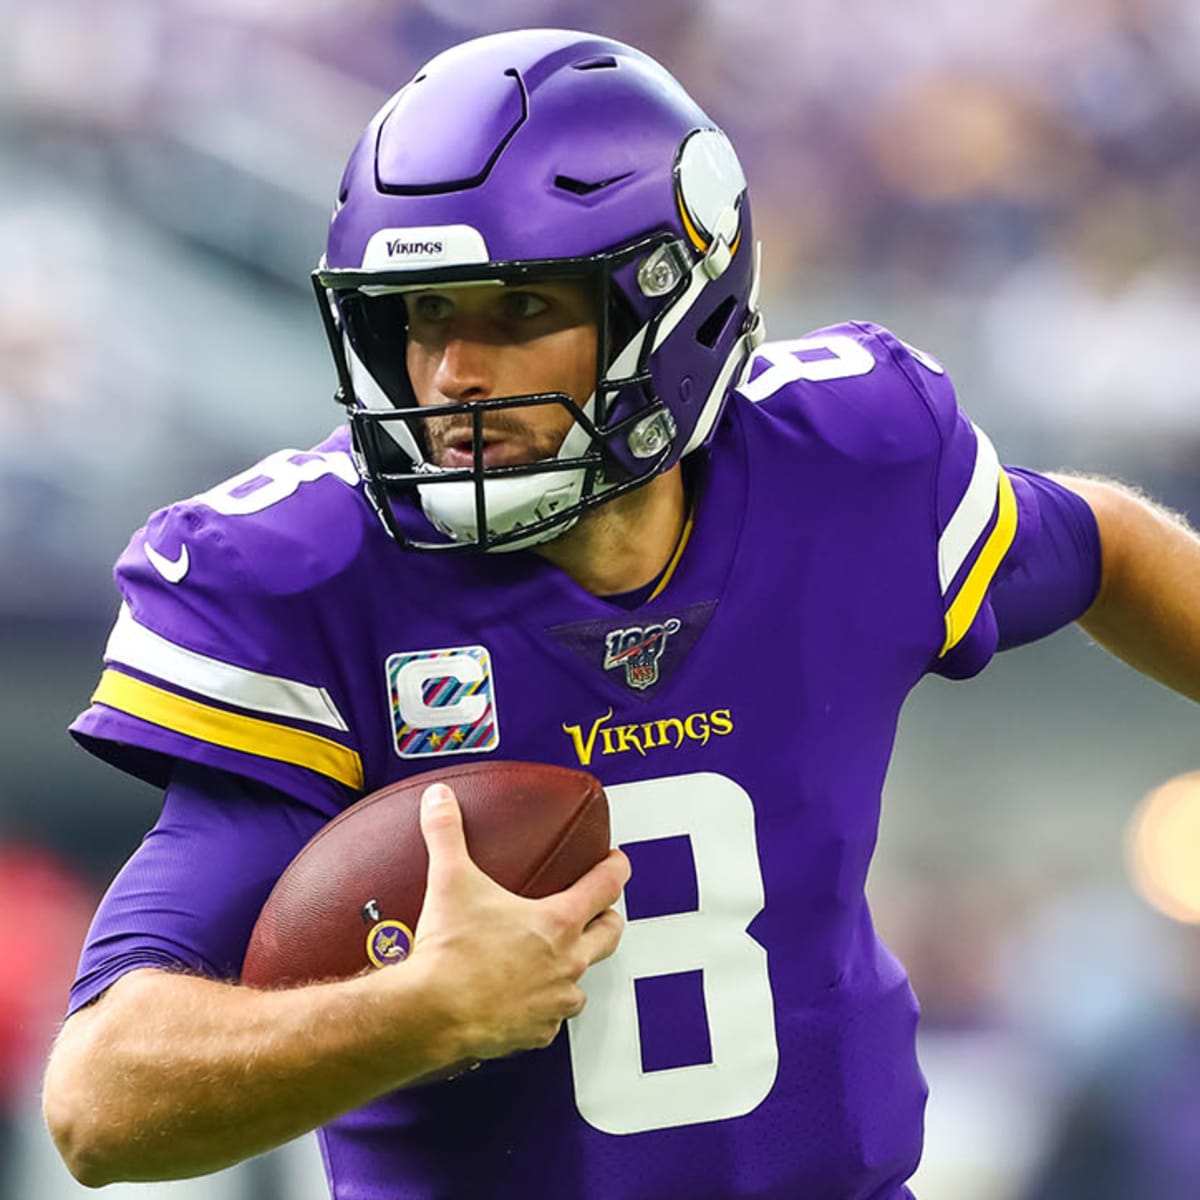 Watch Vikings vs. Colts: TV channel, live stream info, start time 